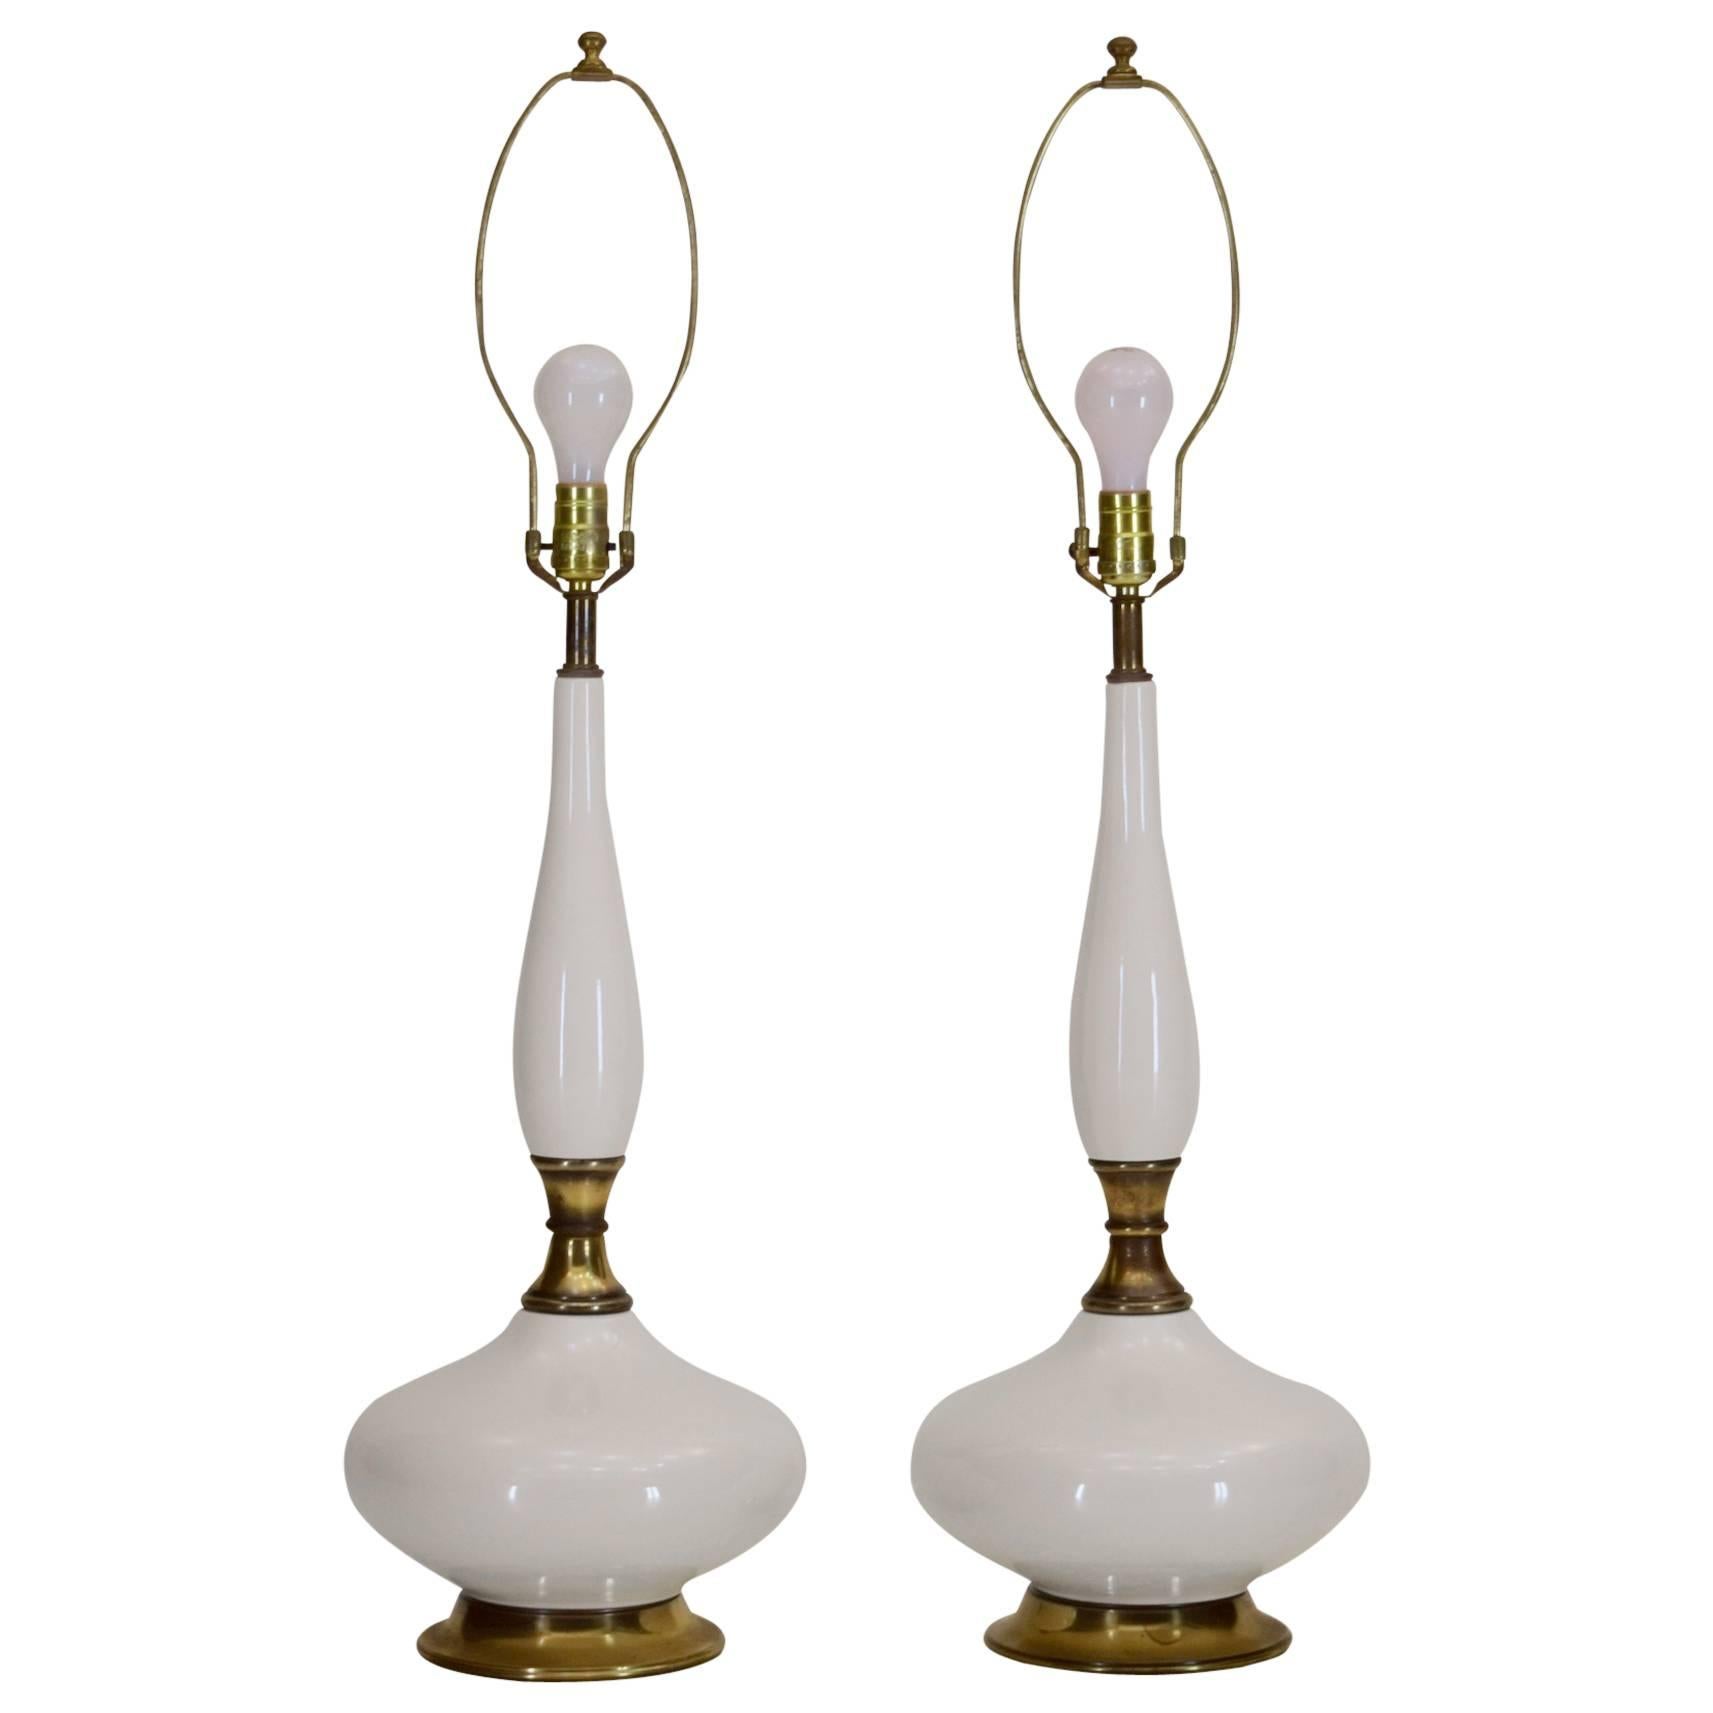 Monumental Pair of Porcelain Table Lamps with Gloss Finish